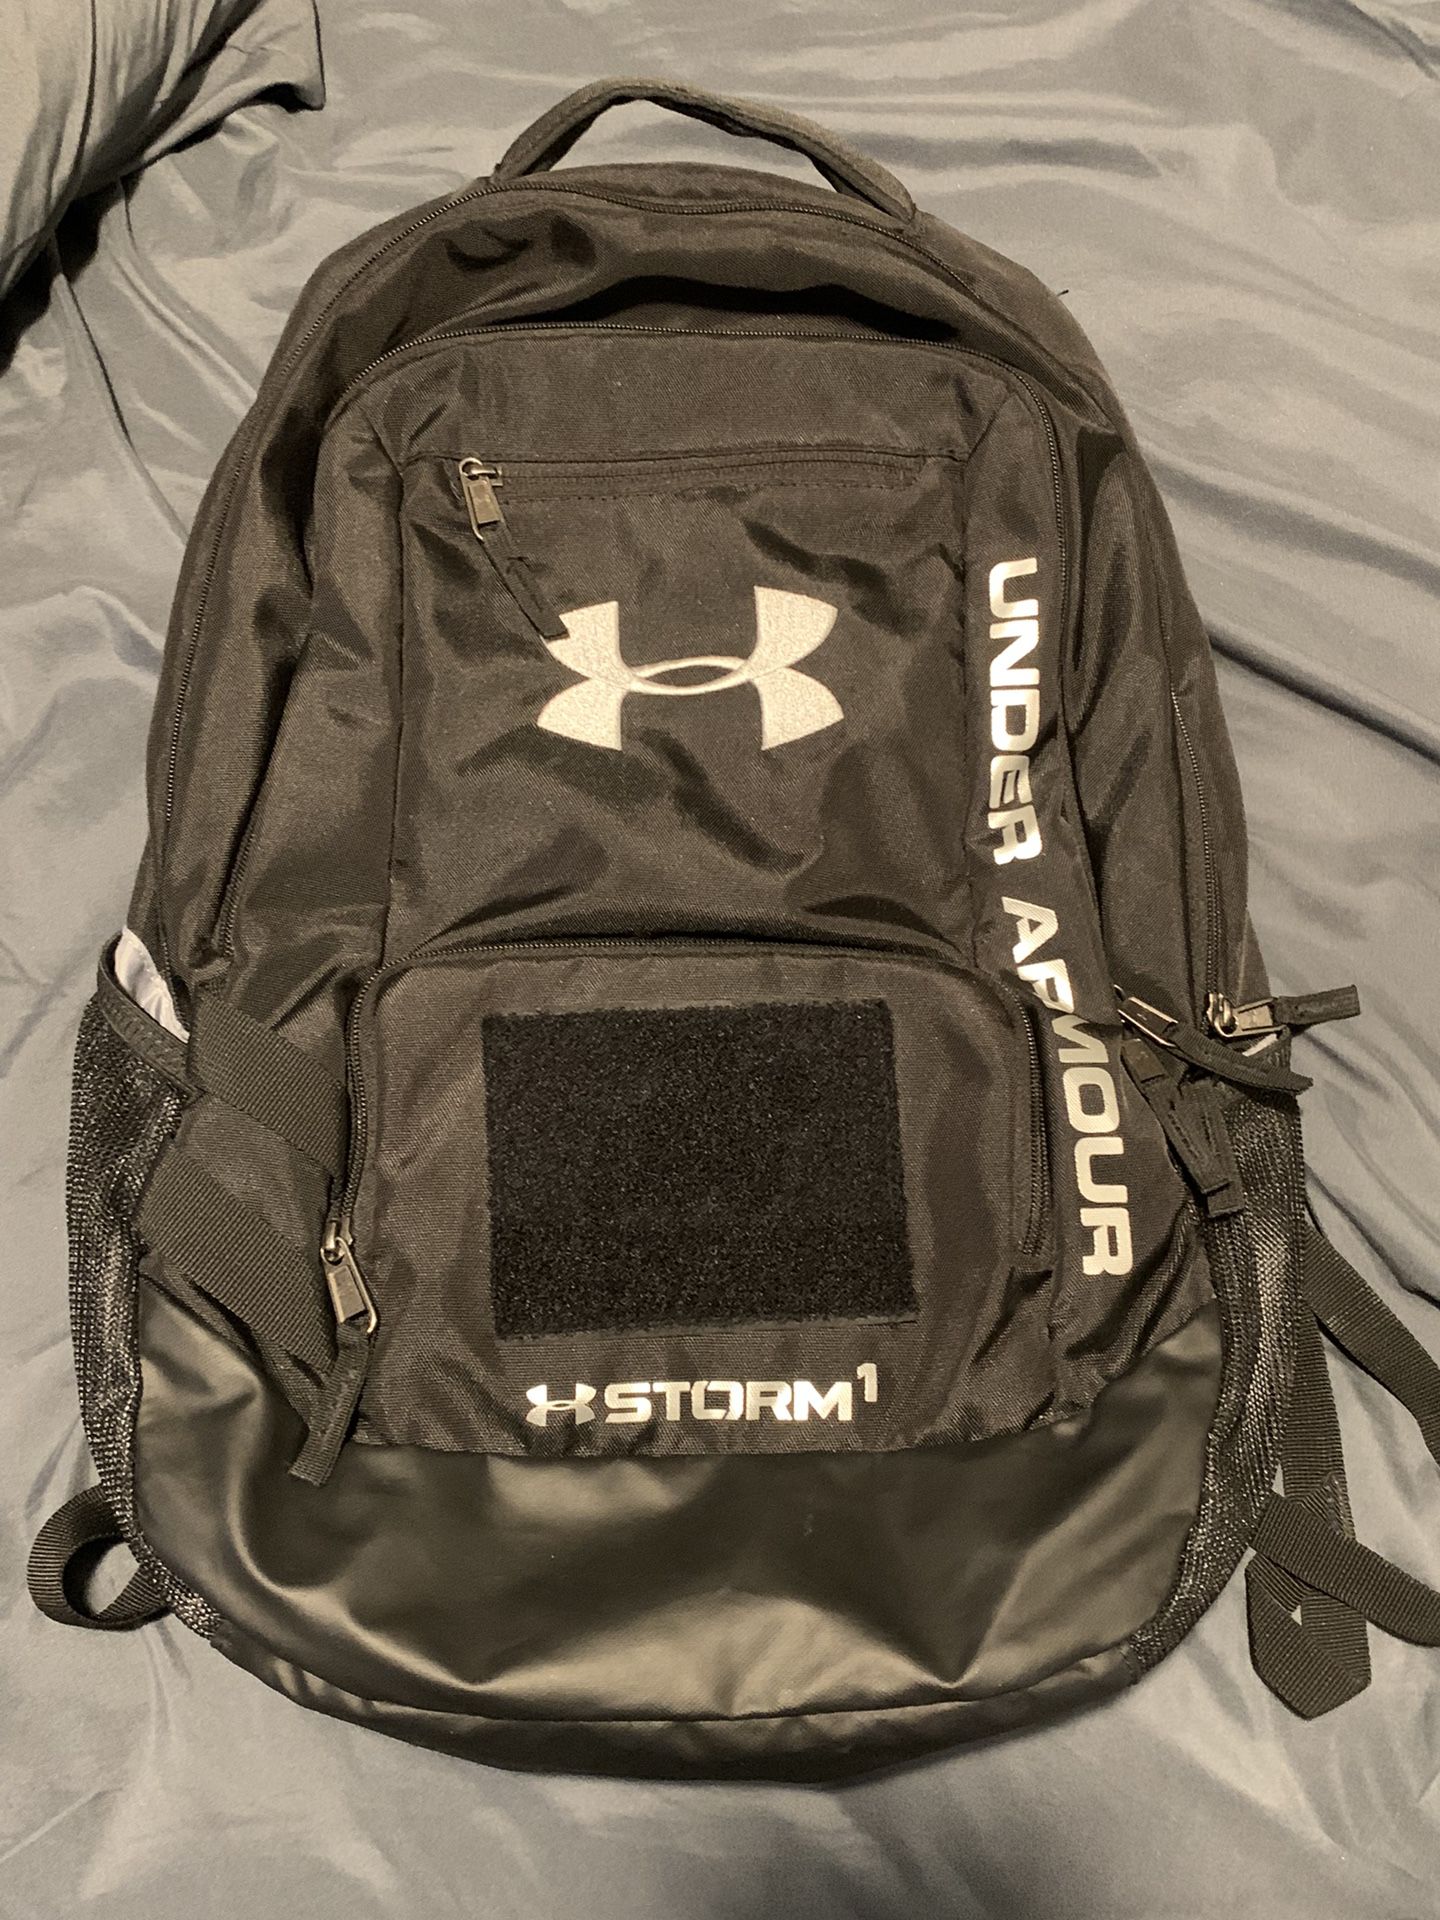 Under Armour Storm Backpack Black